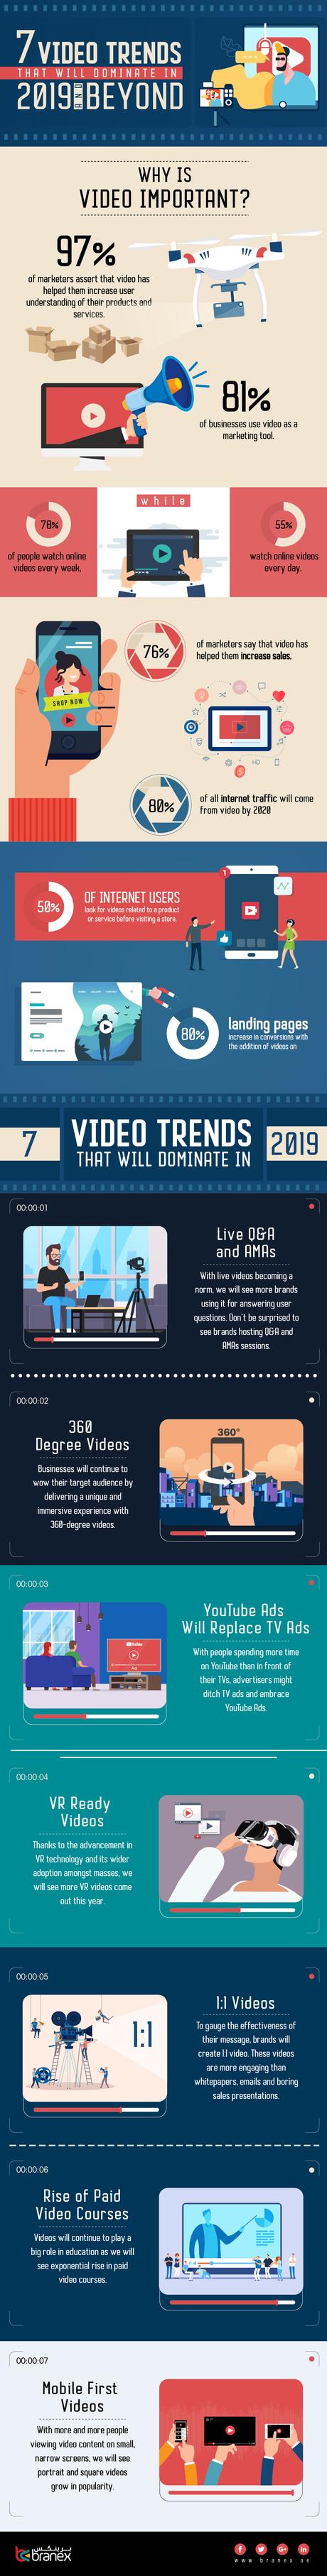 Online Video Dominates Digital Marketing Today with 7 Trends